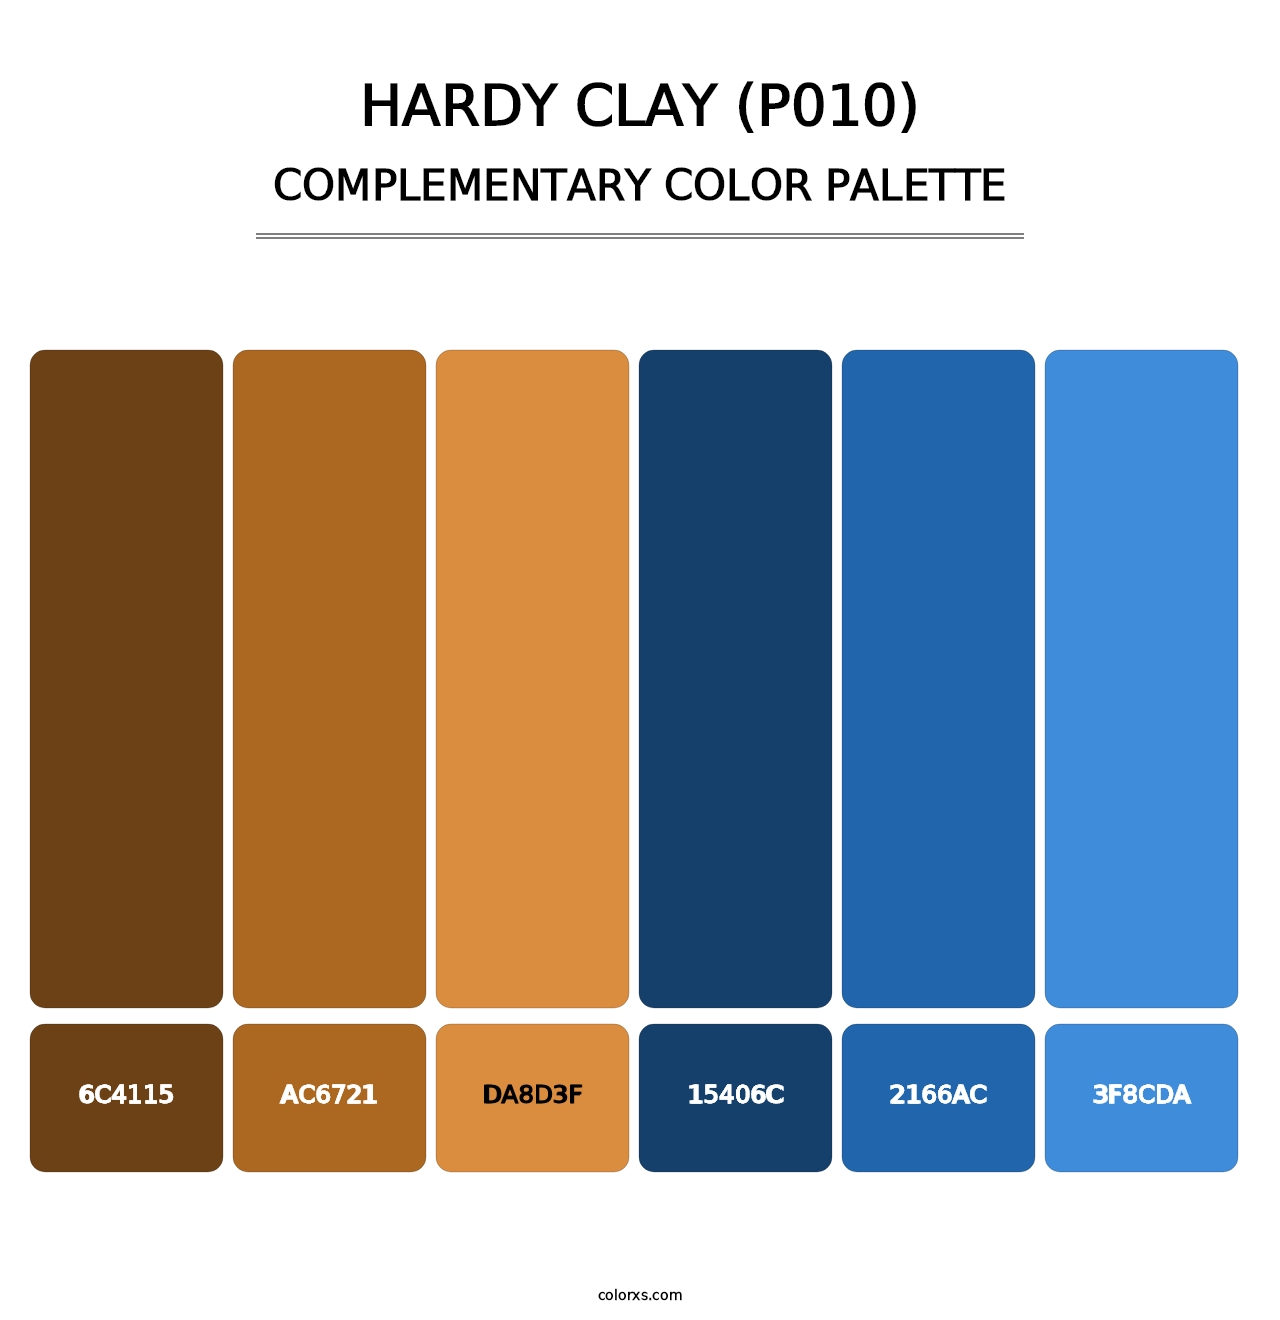 Hardy Clay (P010) - Complementary Color Palette